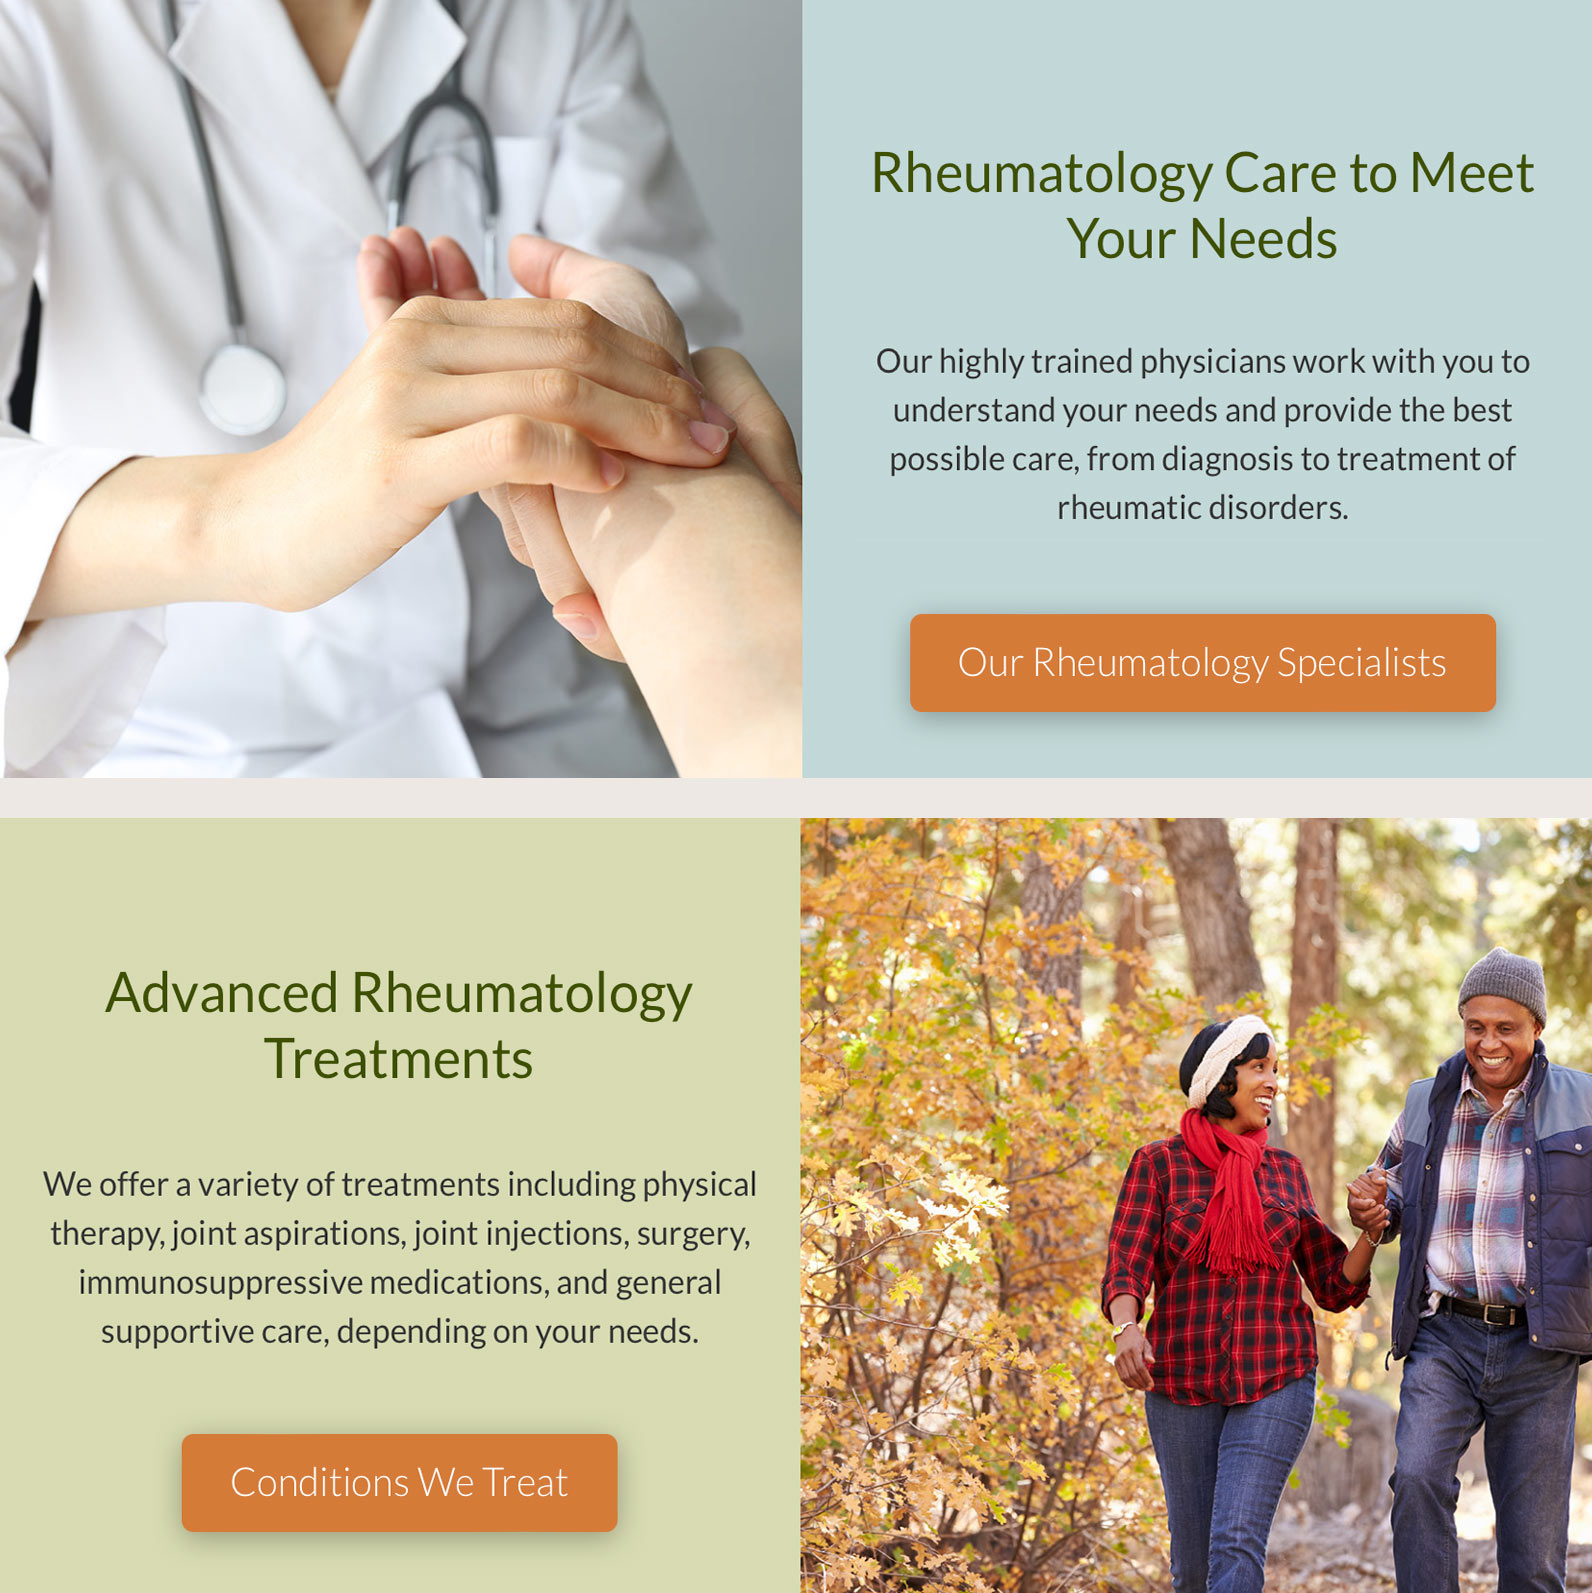 Photos and messaging CTAs on the Oregon Rheumatology Specialists website.